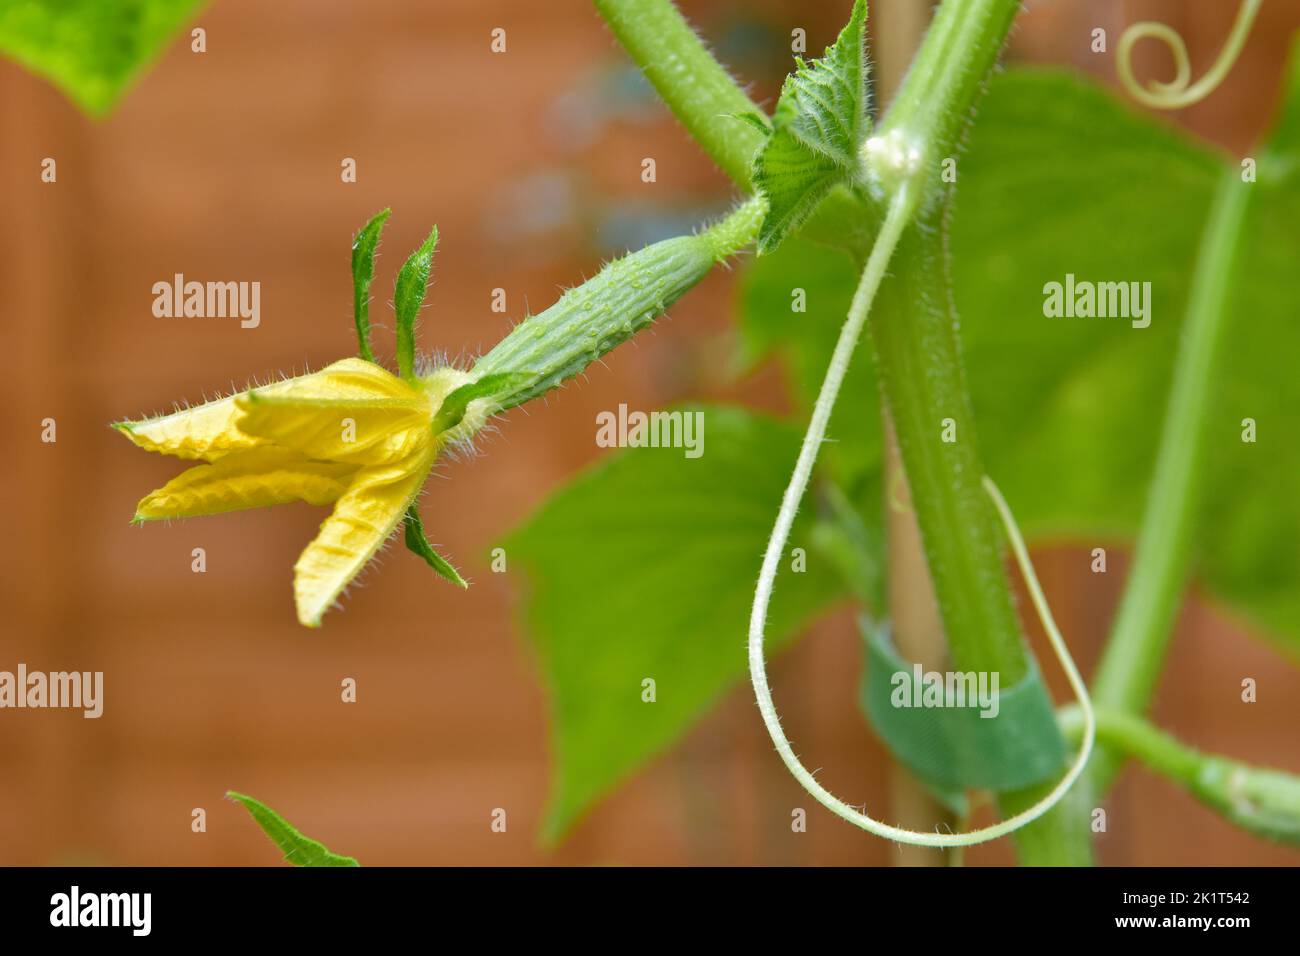 Close up of baby cucumber growing organically. Cucumber variety Delistar F1 Stock Photo